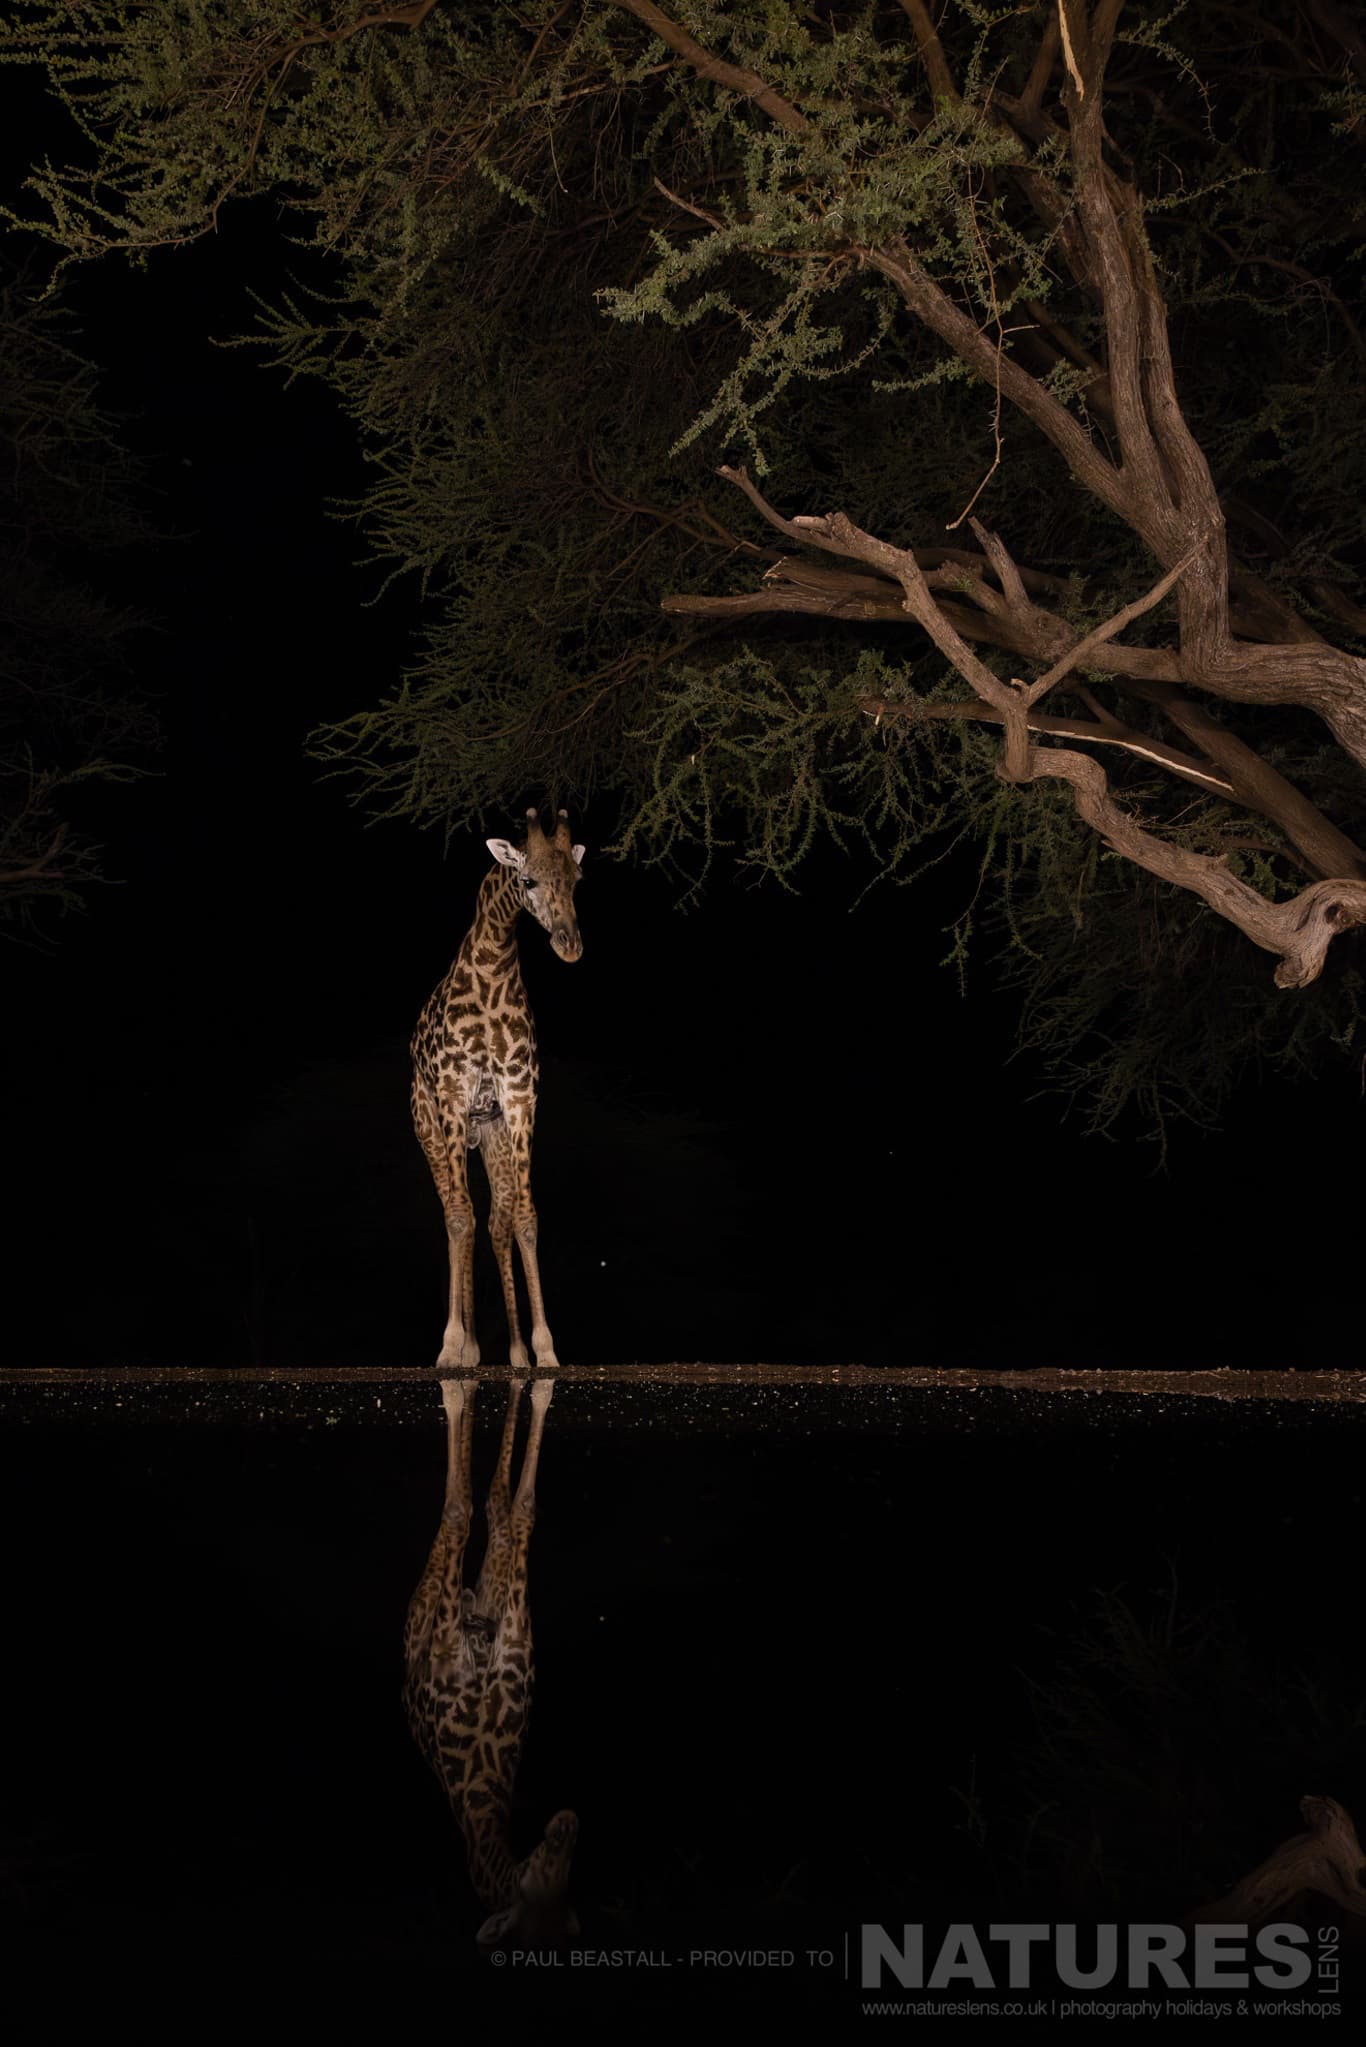 A Giraffe Photographed At Night At The Waterhole By Paul Beastall During A Photography Holiday In The Southern Great Rift Valley With Natureslens